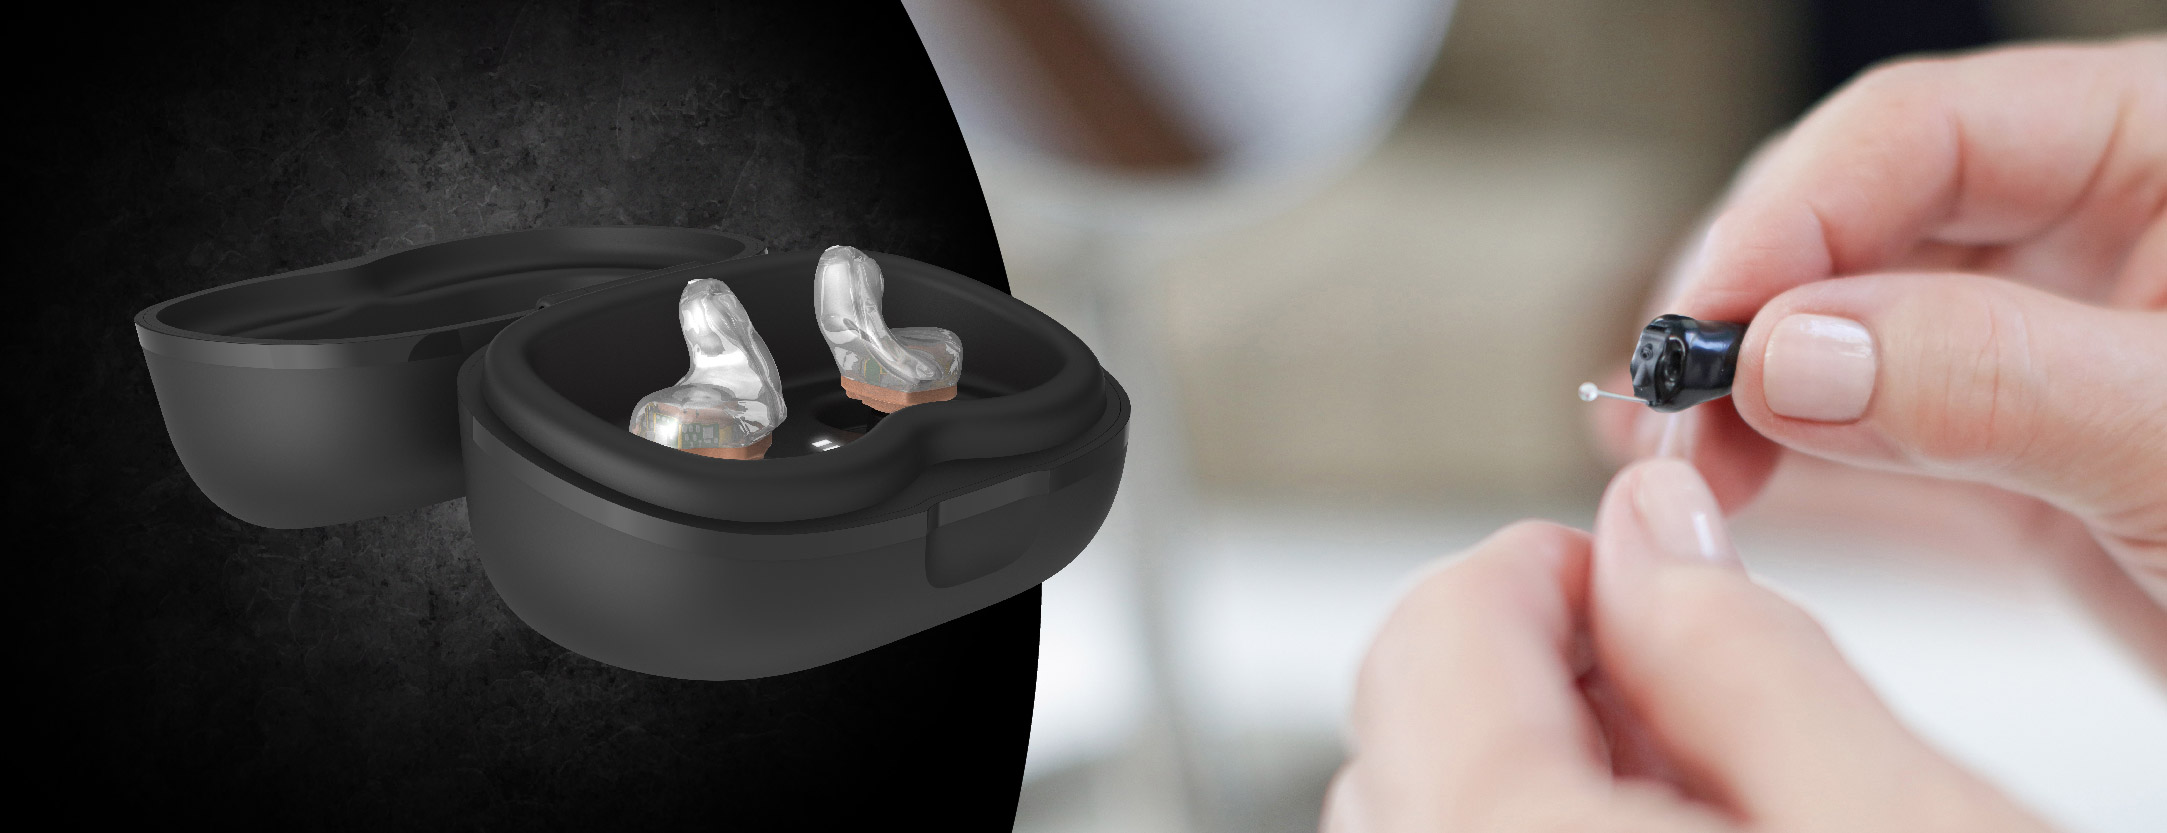 Image of Signature Series hearing aids in charger and Signature Series hearing aids in hands